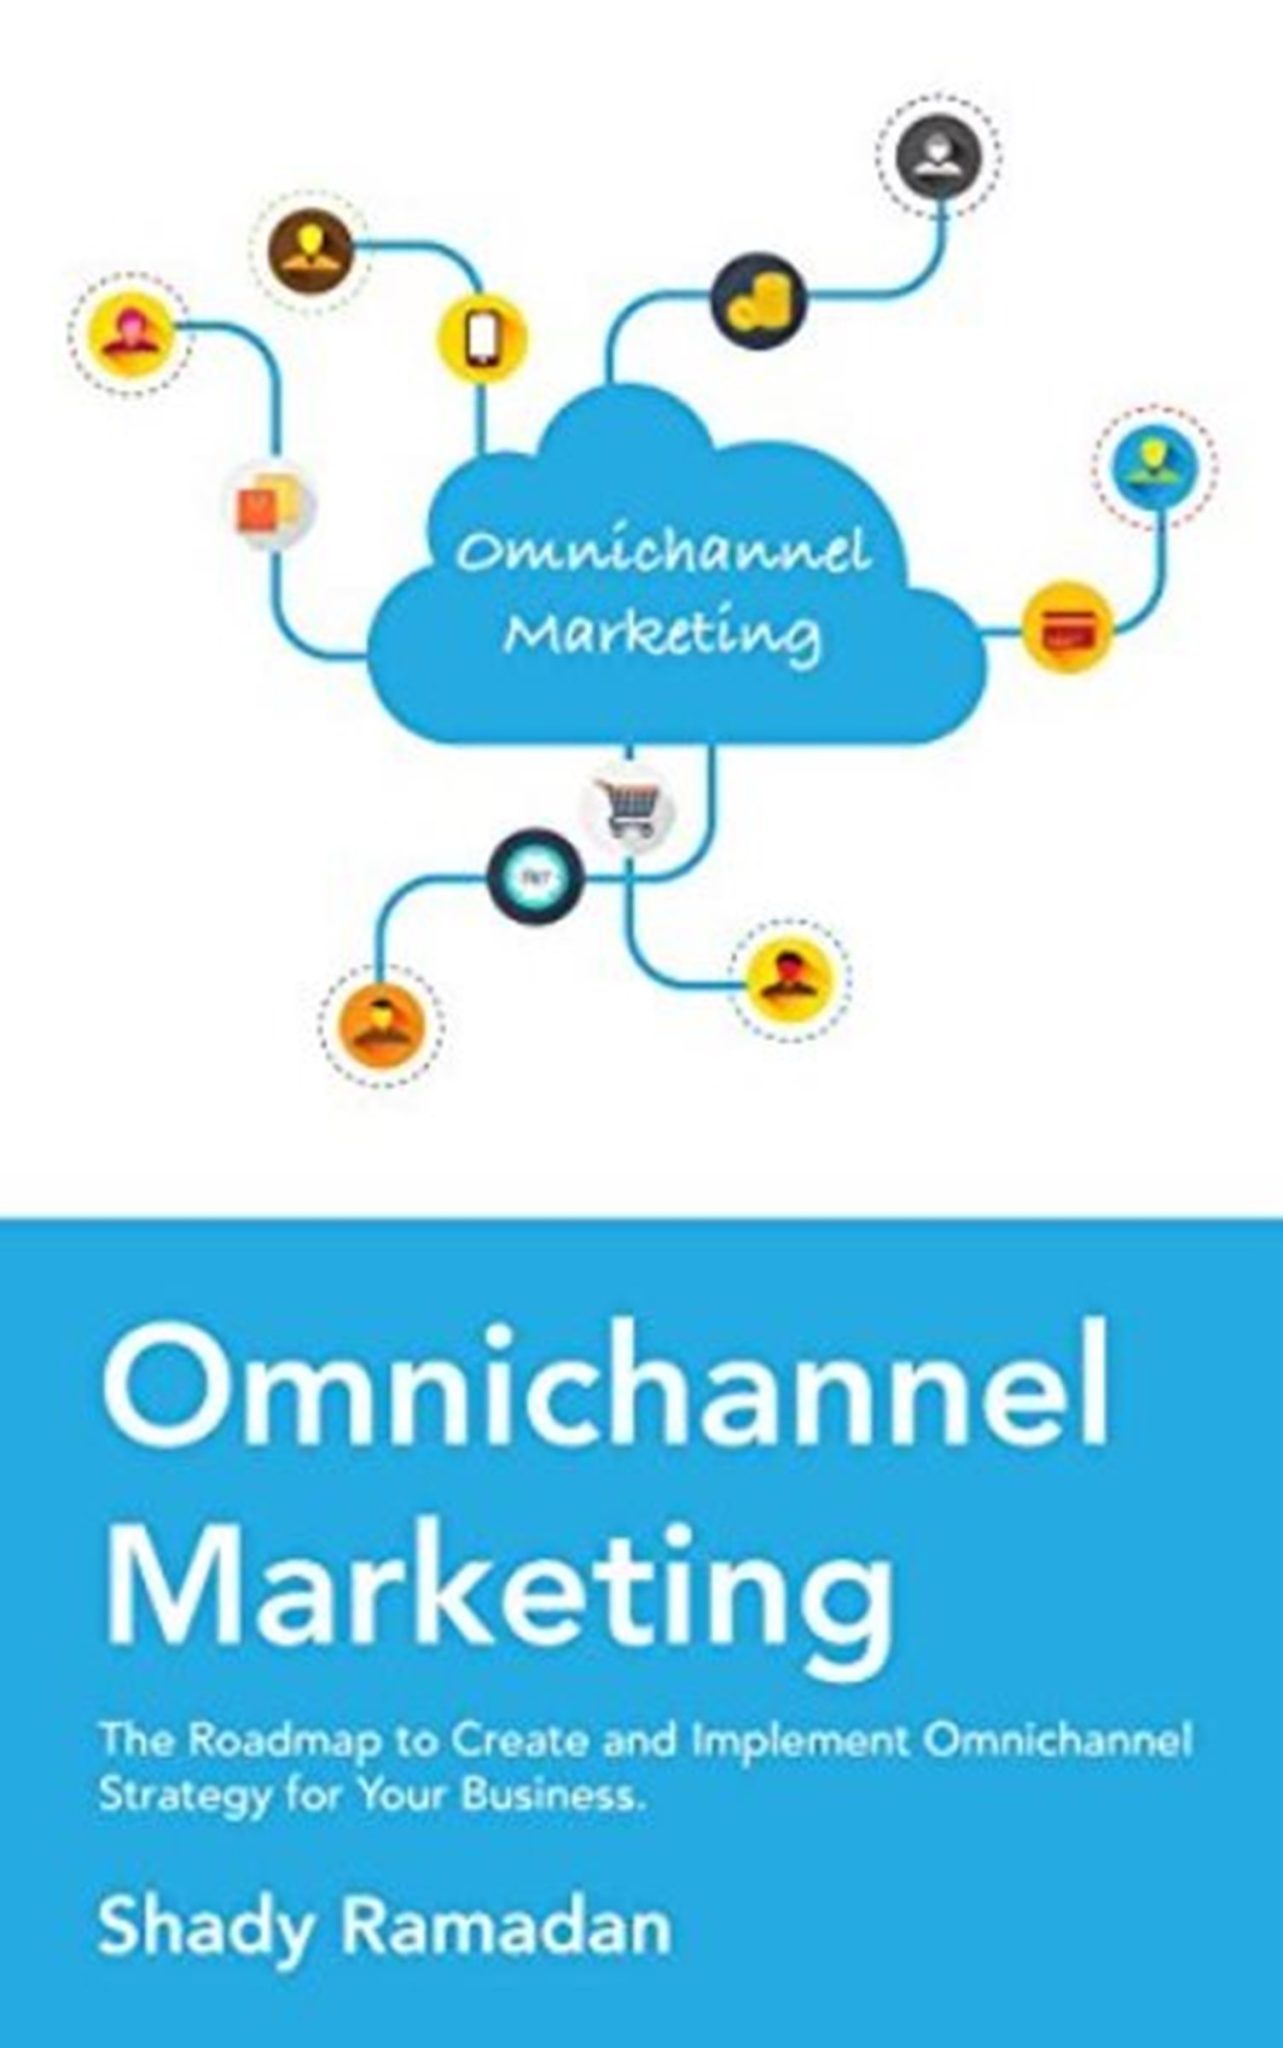 FREE: OmniChannel Marketing: The Roadmap to Create and Implement Omnichannel Strategy For Your Business by Shady Ramadan